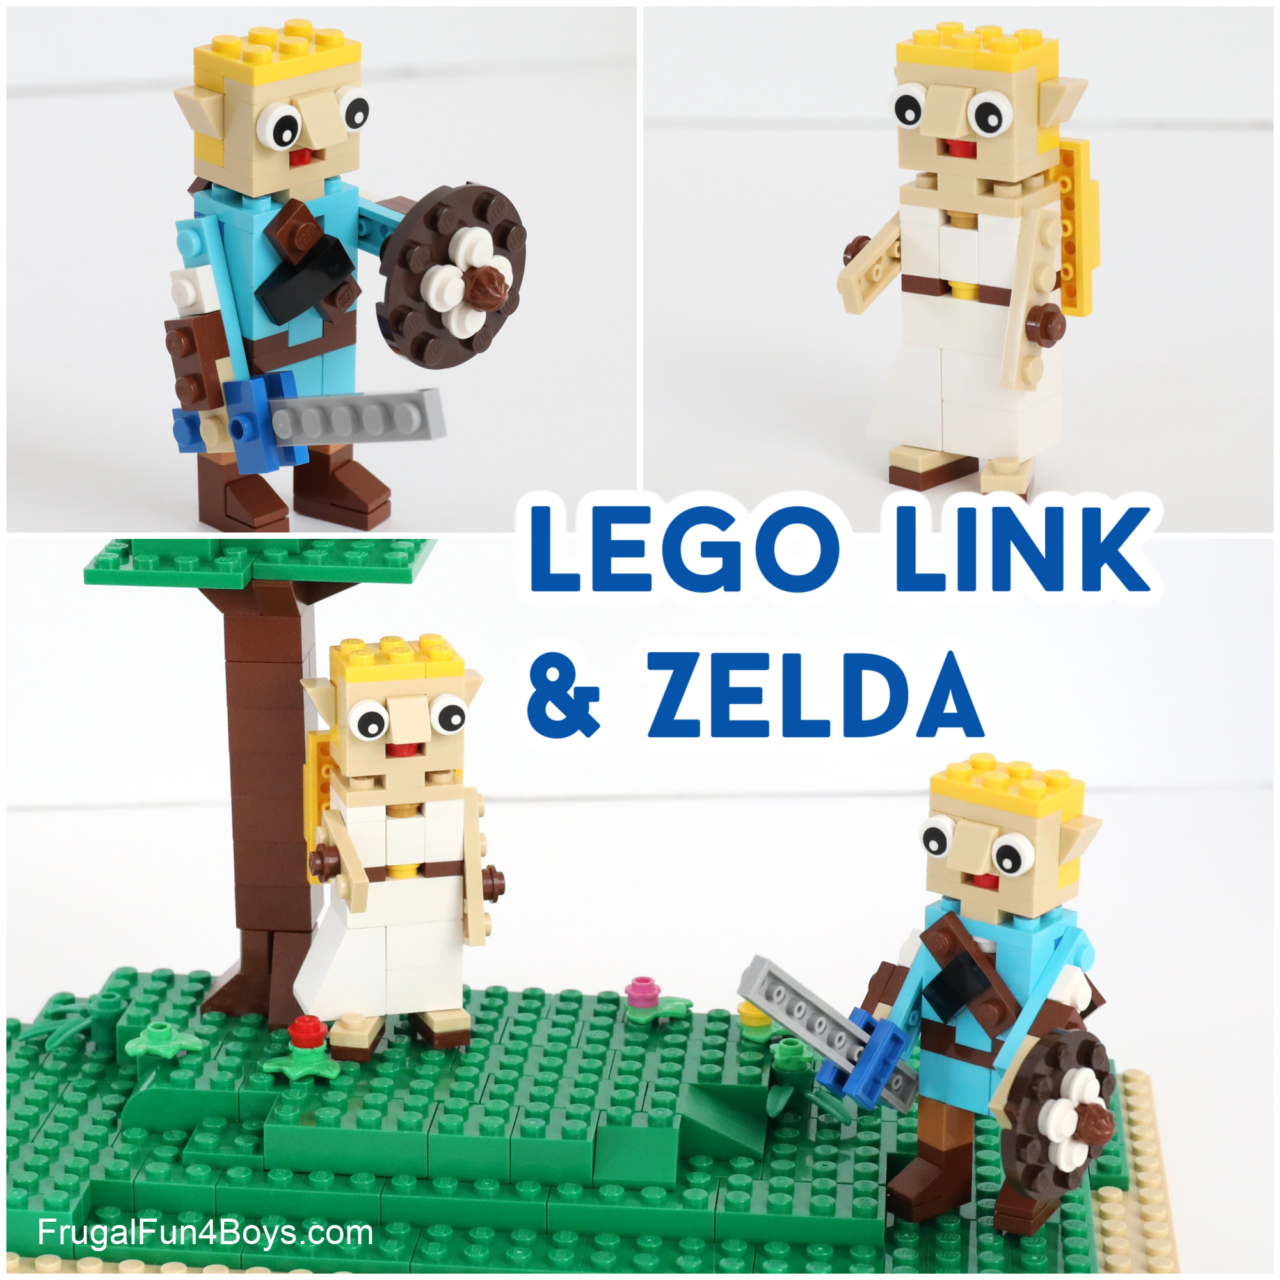 Build Link and Zelda with LEGO Bricks - Frugal Fun For Boys and Girls